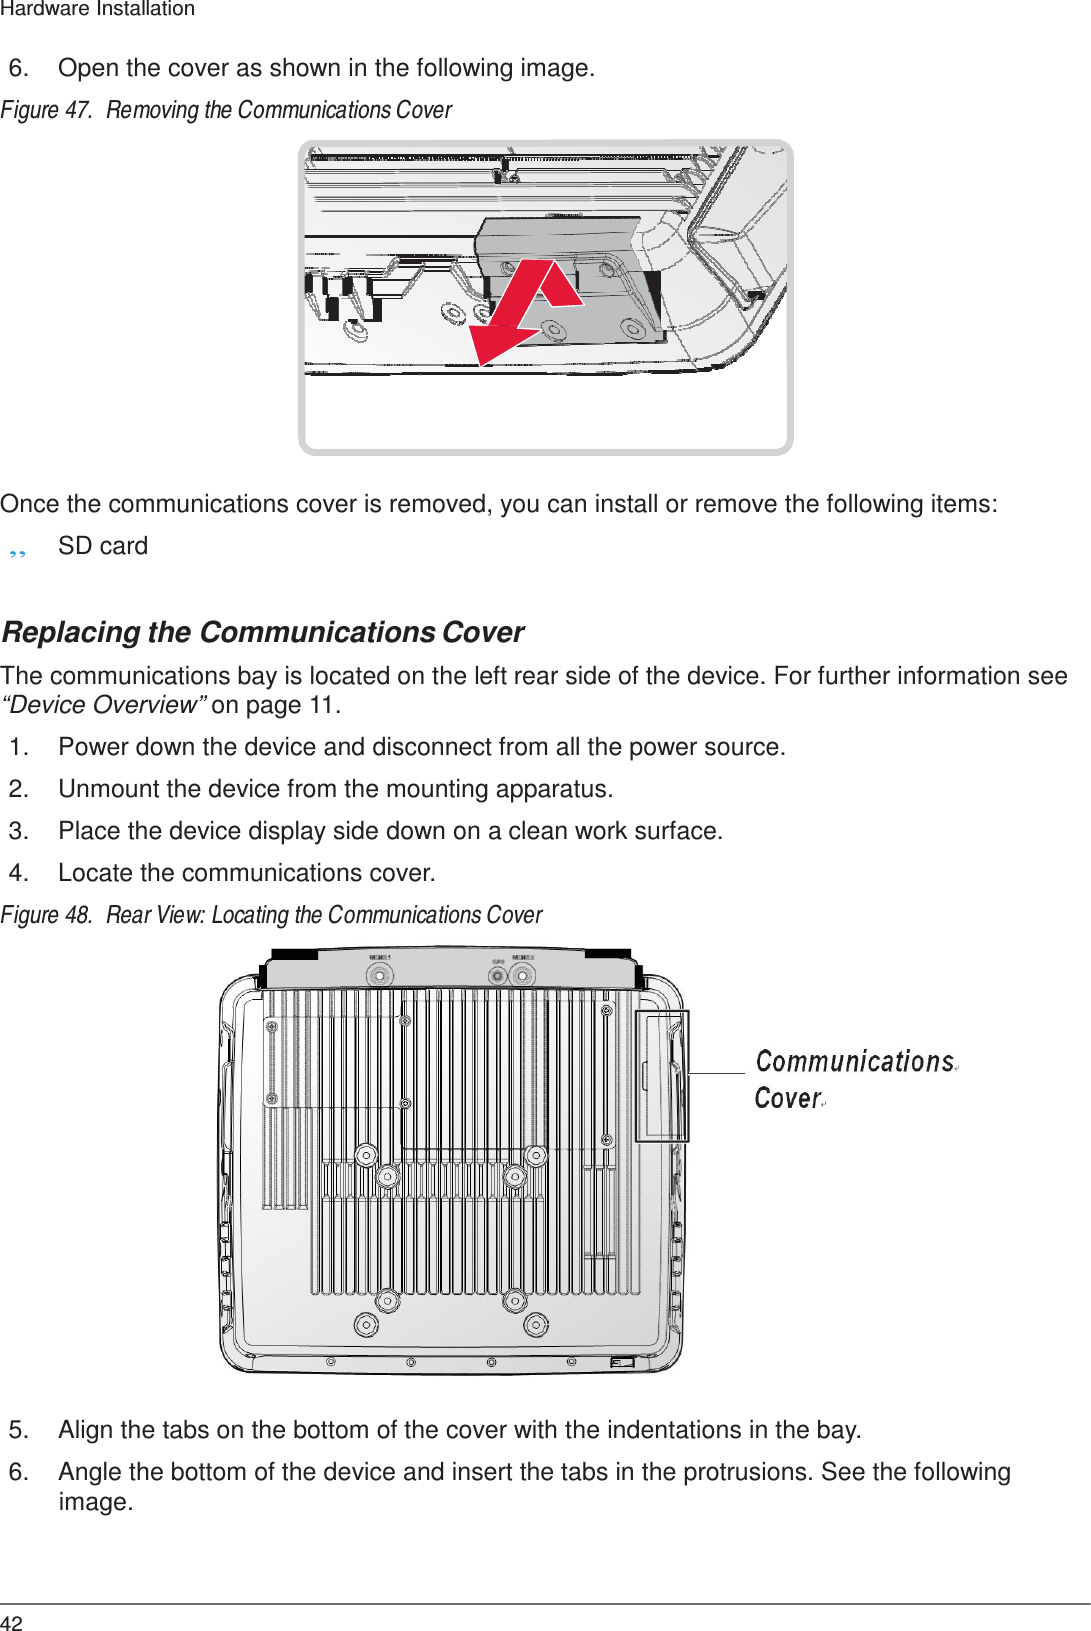  Hardware Installation   6.  Open the cover as shown in the following image.  Figure 47.  Removing the Communications Cover                  Once the communications cover is removed, you can install or remove the following items: „ SD card   Replacing the Communications Cover  The communications bay is located on the left rear side of the device. For further information see “Device Overview” on page 11.  1.  Power down the device and disconnect from all the power source.  2.  Unmount the device from the mounting apparatus.  3.  Place the device display side down on a clean work surface.  4.  Locate the communications cover.  Figure 48.  Rear View: Locating the Communications Cover                        5.  Align the tabs on the bottom of the cover with the indentations in the bay.  6.  Angle the bottom of the device and insert the tabs in the protrusions. See the following image.     42 